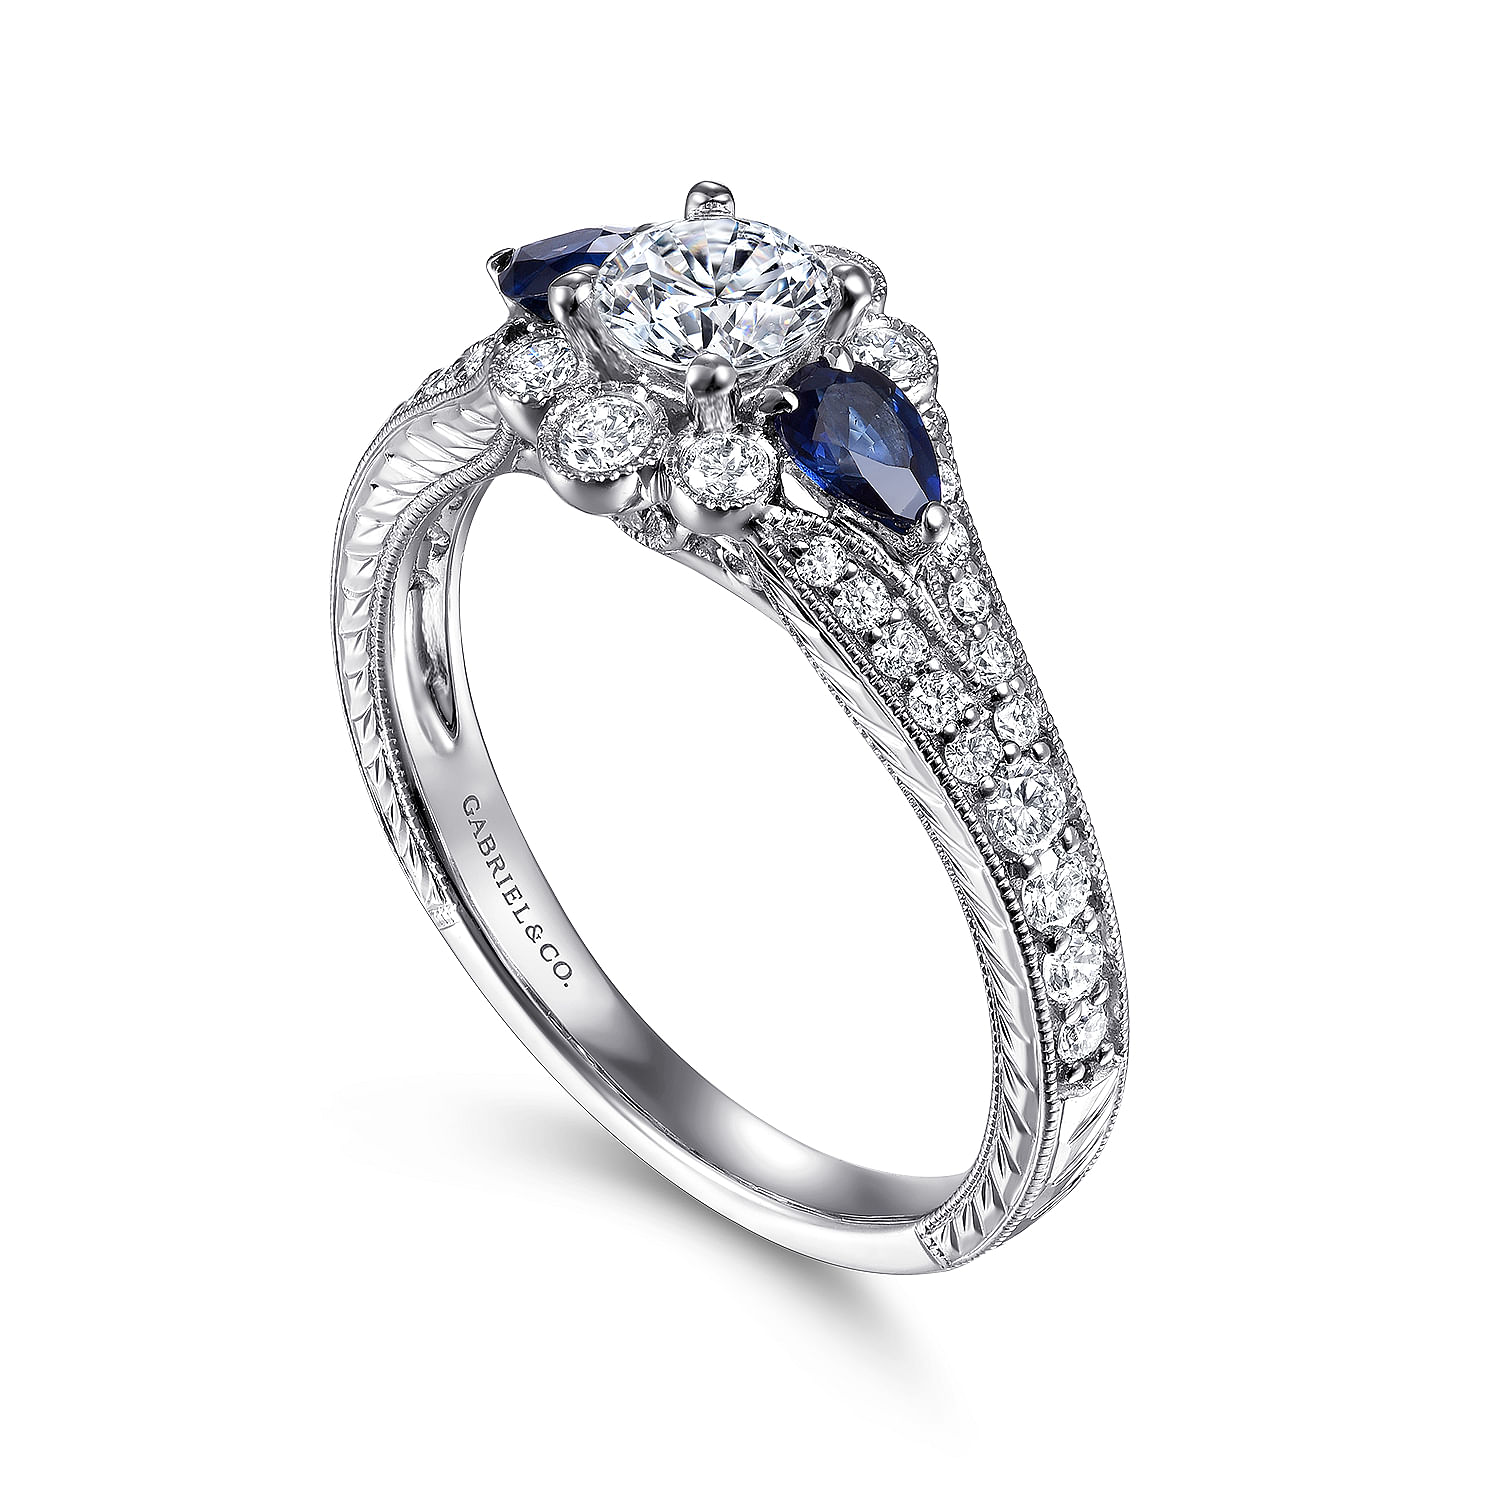 Vintage Inspired 14K White Gold Round Halo Sapphire and Diamond Engagement Ring